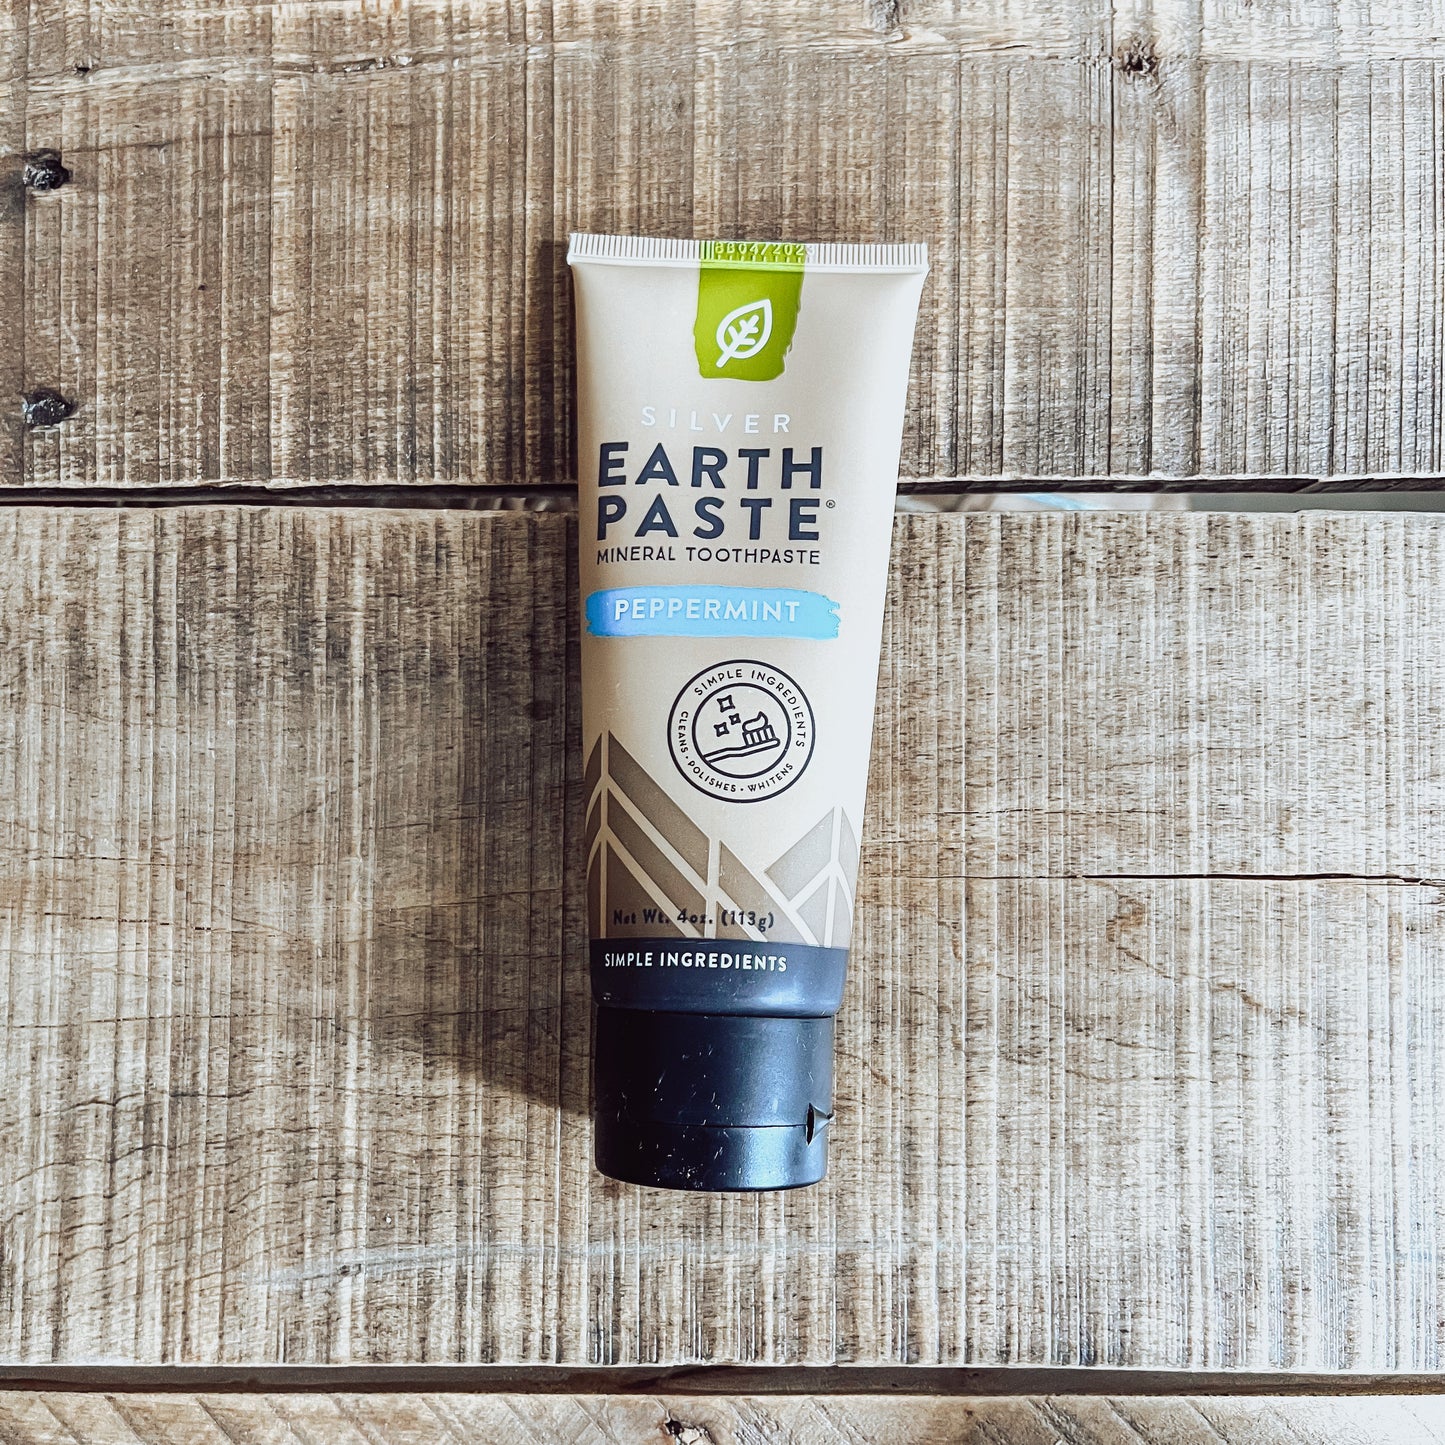 Silver Earth Paste Mineral Toothpaste - Peppermint